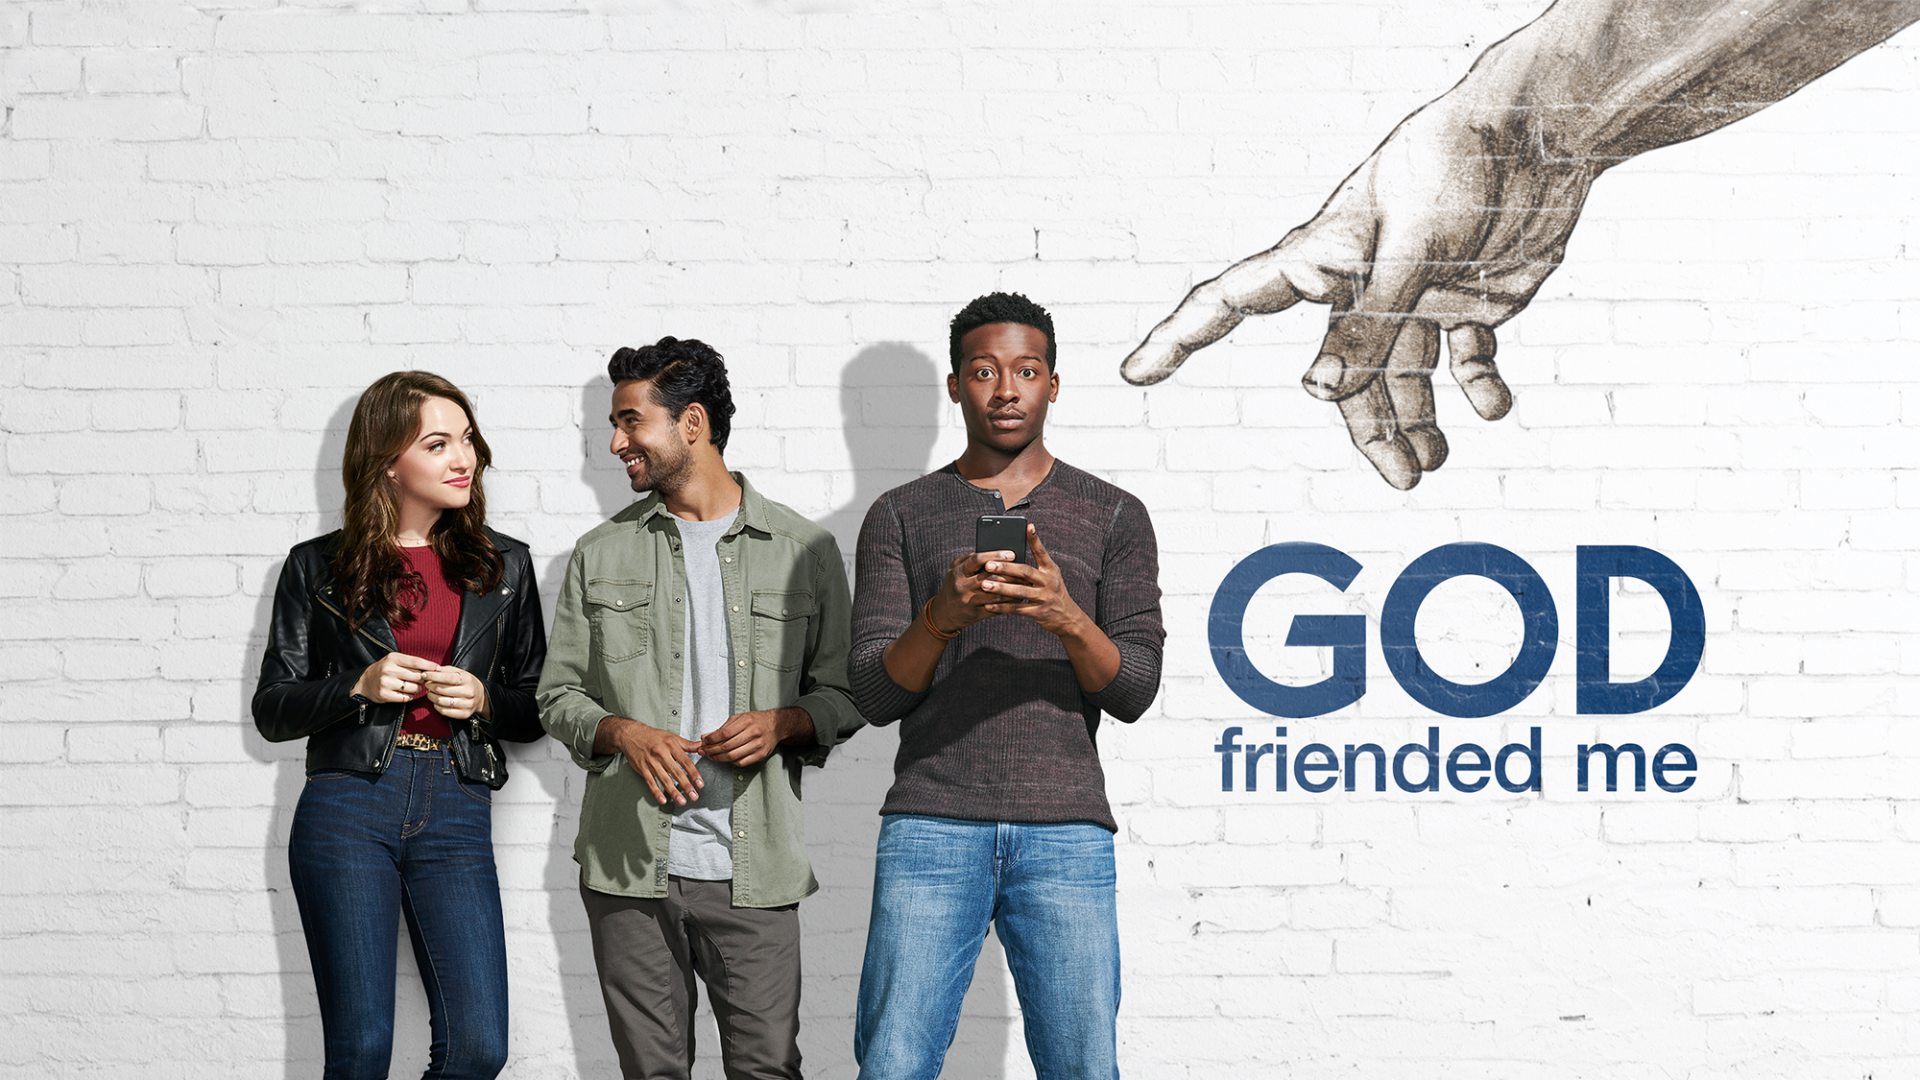 Preview Screening of God Friended Me | The Seattle School of Theology & Psychology1920 x 1080